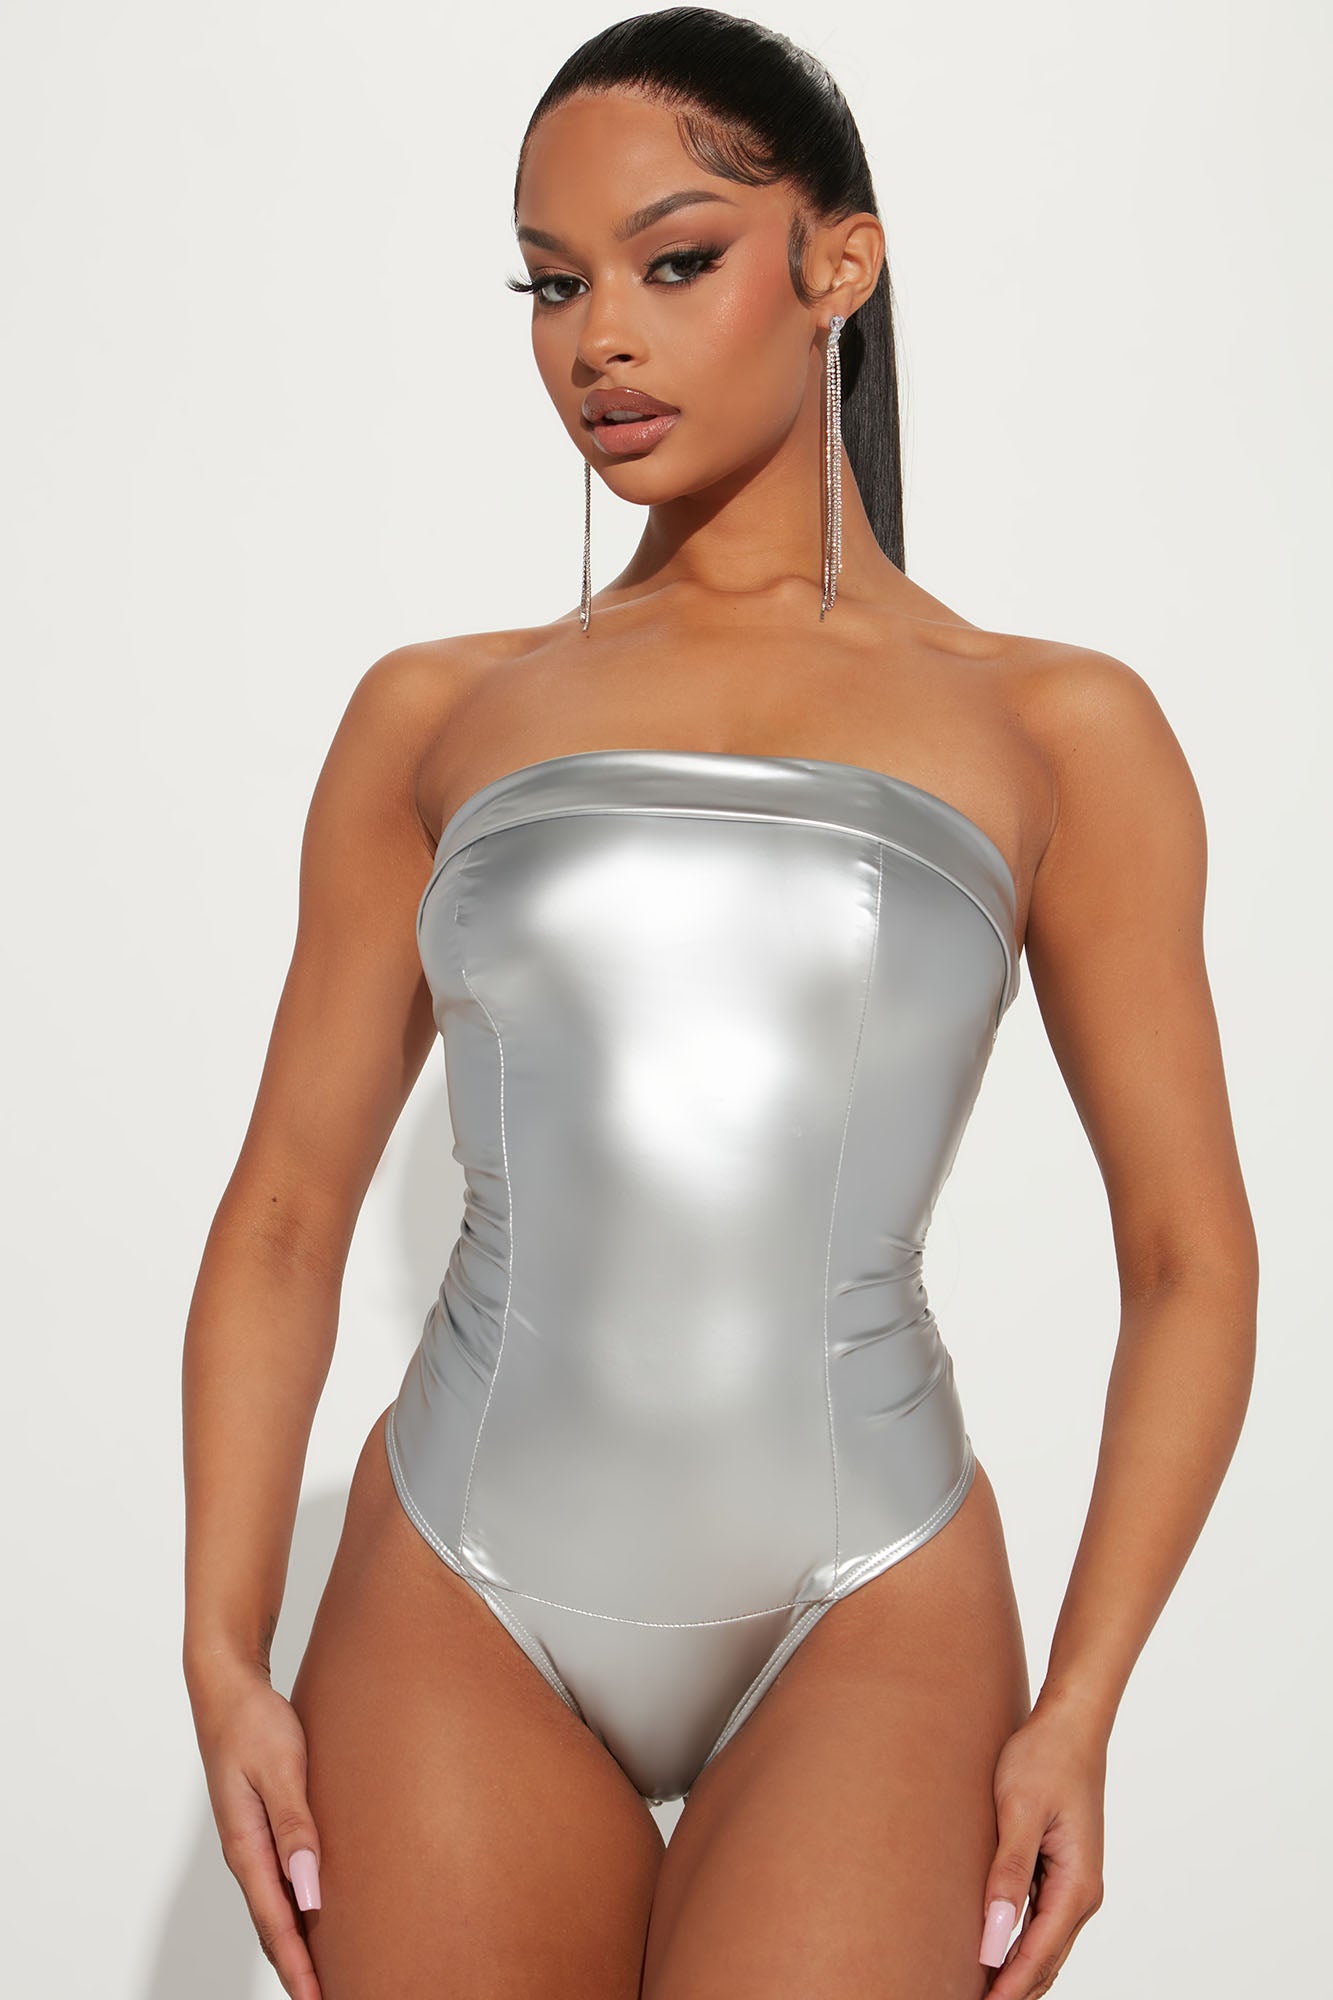 Luxury Designer Lady's Bodysuit With Faux Leather. 0962/0963